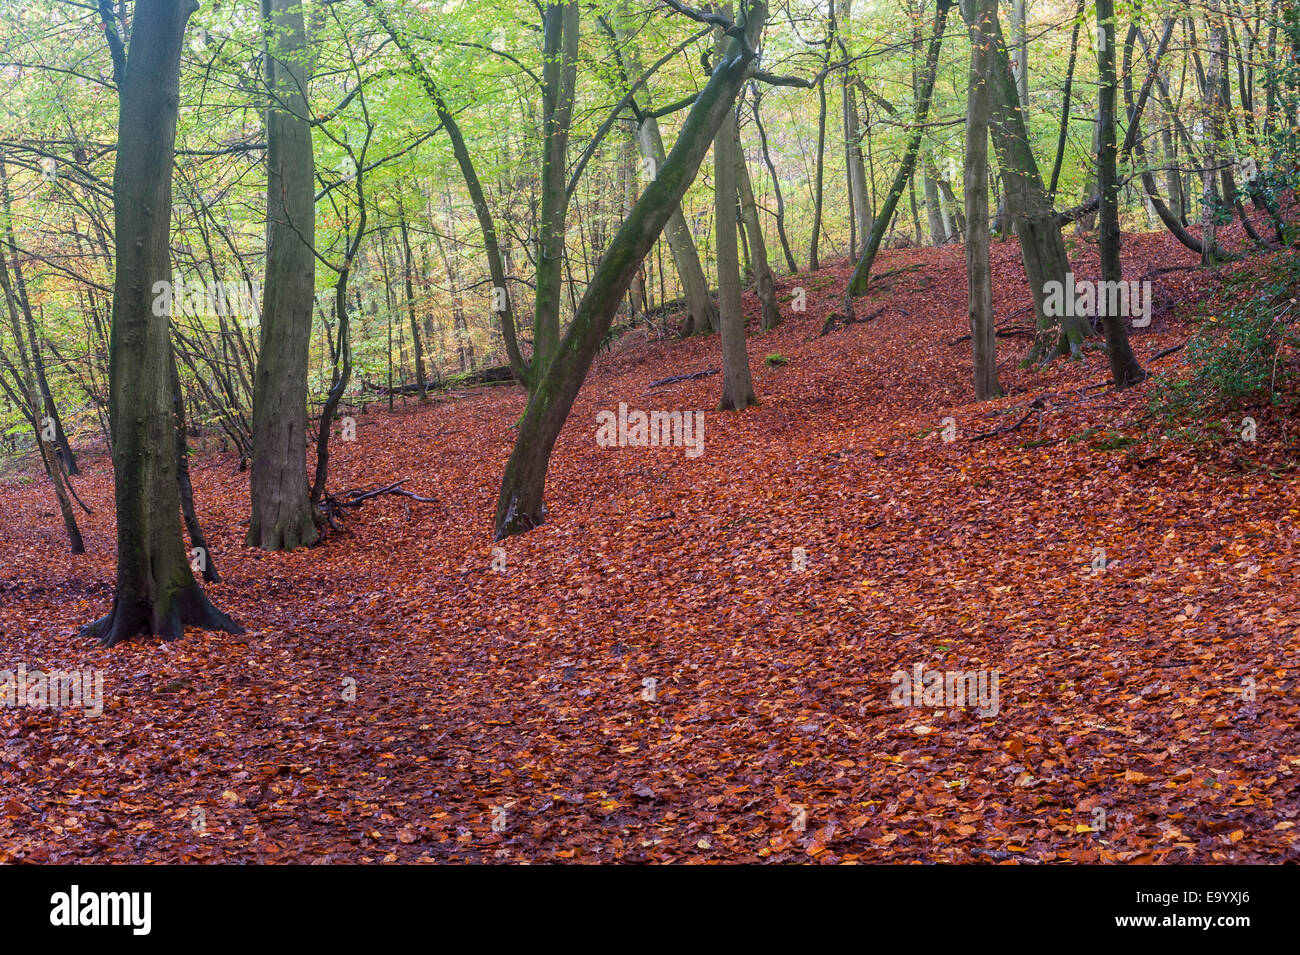 Buckinghamshire, UK, 4 November 2014.  Autumn comes to Burnham Beeches,  a Site of Special Scientific Interest (SSSI), a National Nature Reserve (NNR) and European Special Area of Conservation (SAC).  SSSIs and NNRs are protected under British law and SACs are also protected under the European Community's Habitats Directive.  Owned by the City of London Corporation since 1880, The Beeches cover 220 hectares and are noted for ancient beech and oak pollards.   Credit:  Stephen Chung/Alamy Live News Stock Photo